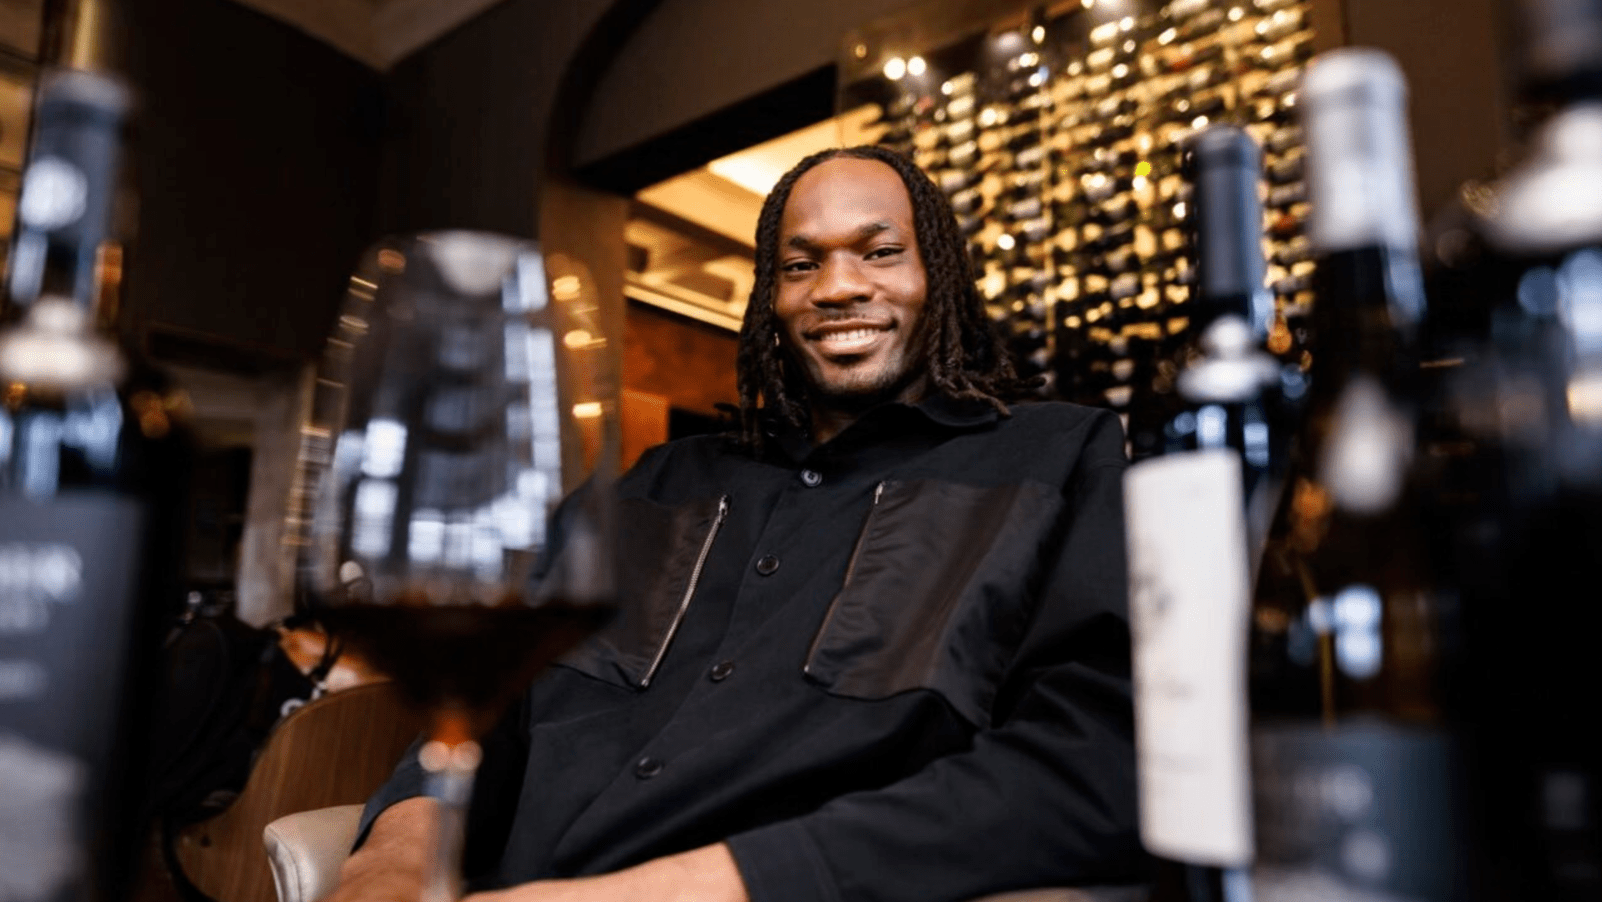 Precious Achiuwa smiling and seated inside a wine cellar with a glass of red wine